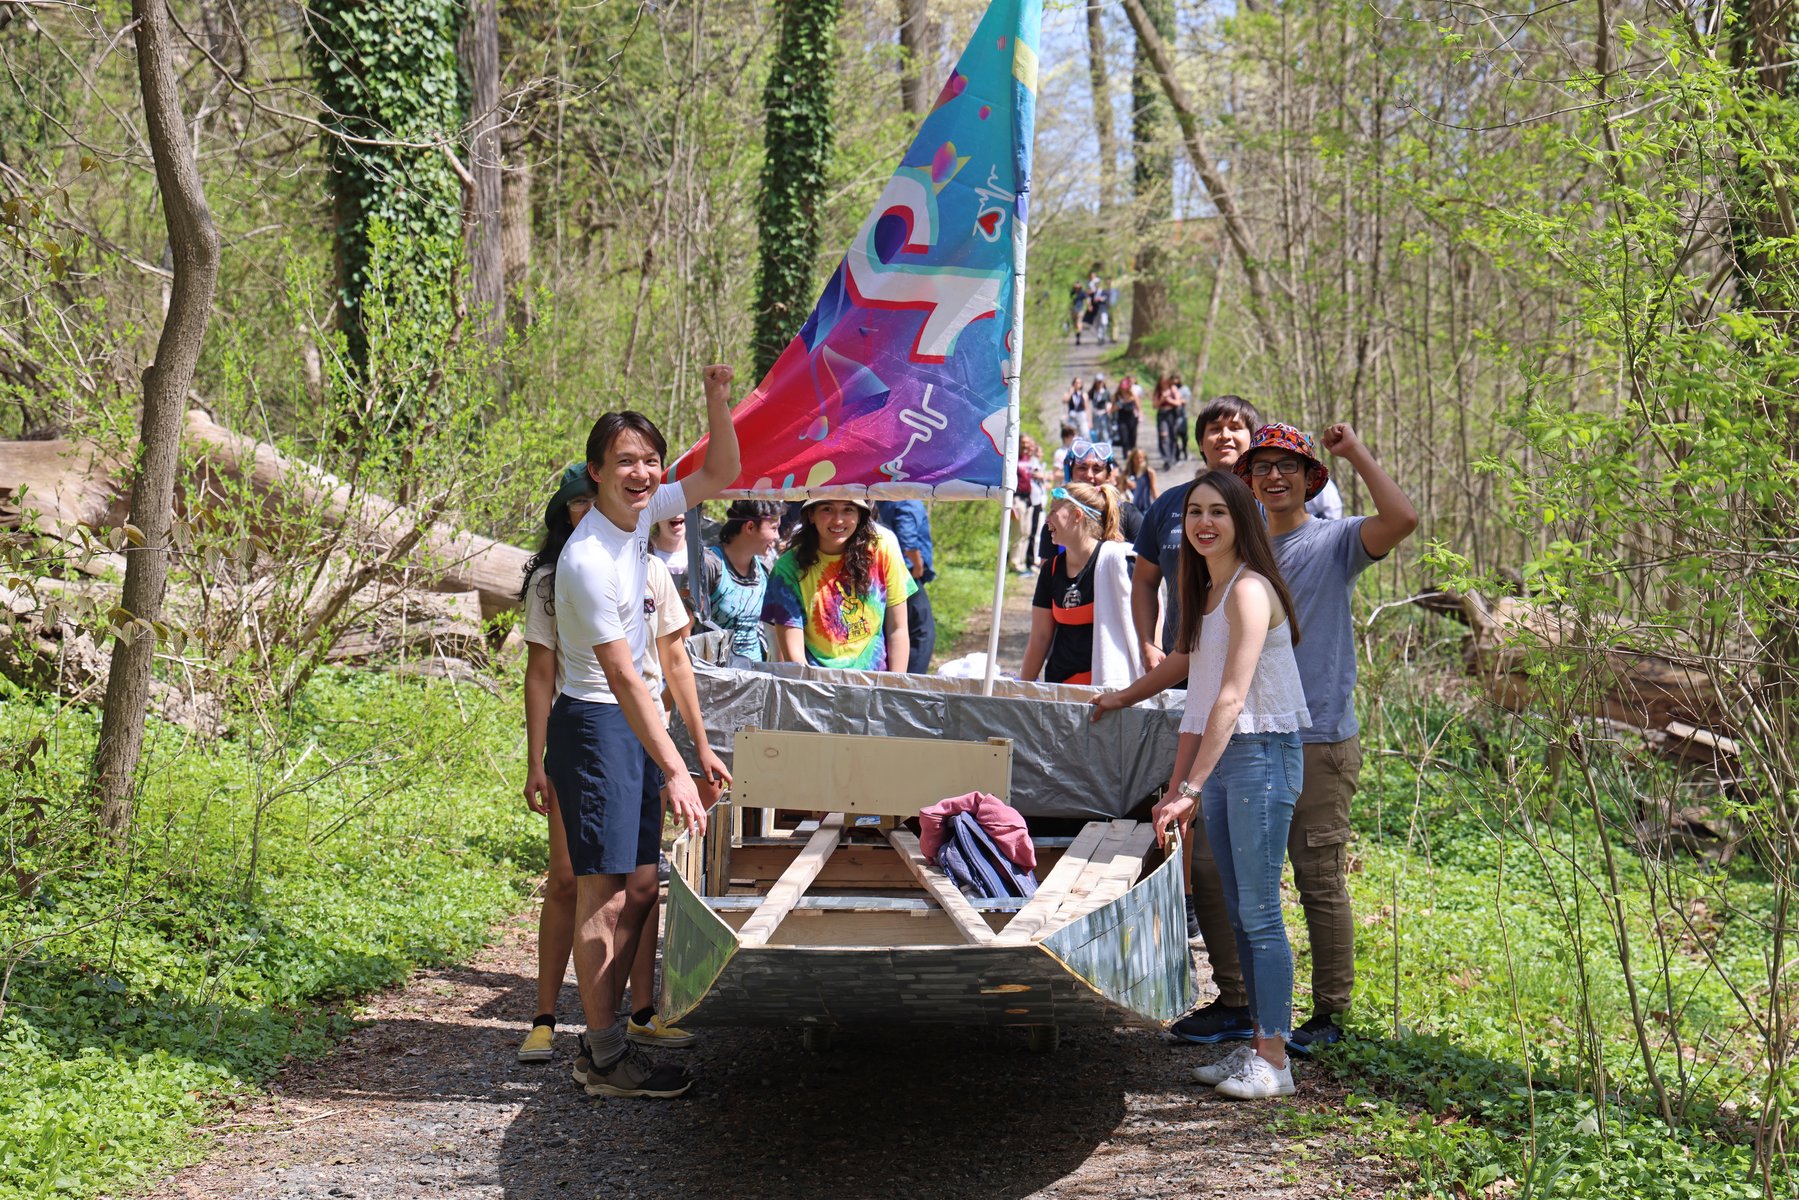 A group of Swarthmore students carry their boat in preparation to enter in the Crum Regatta, one of Swarthmore's many campus traditions.